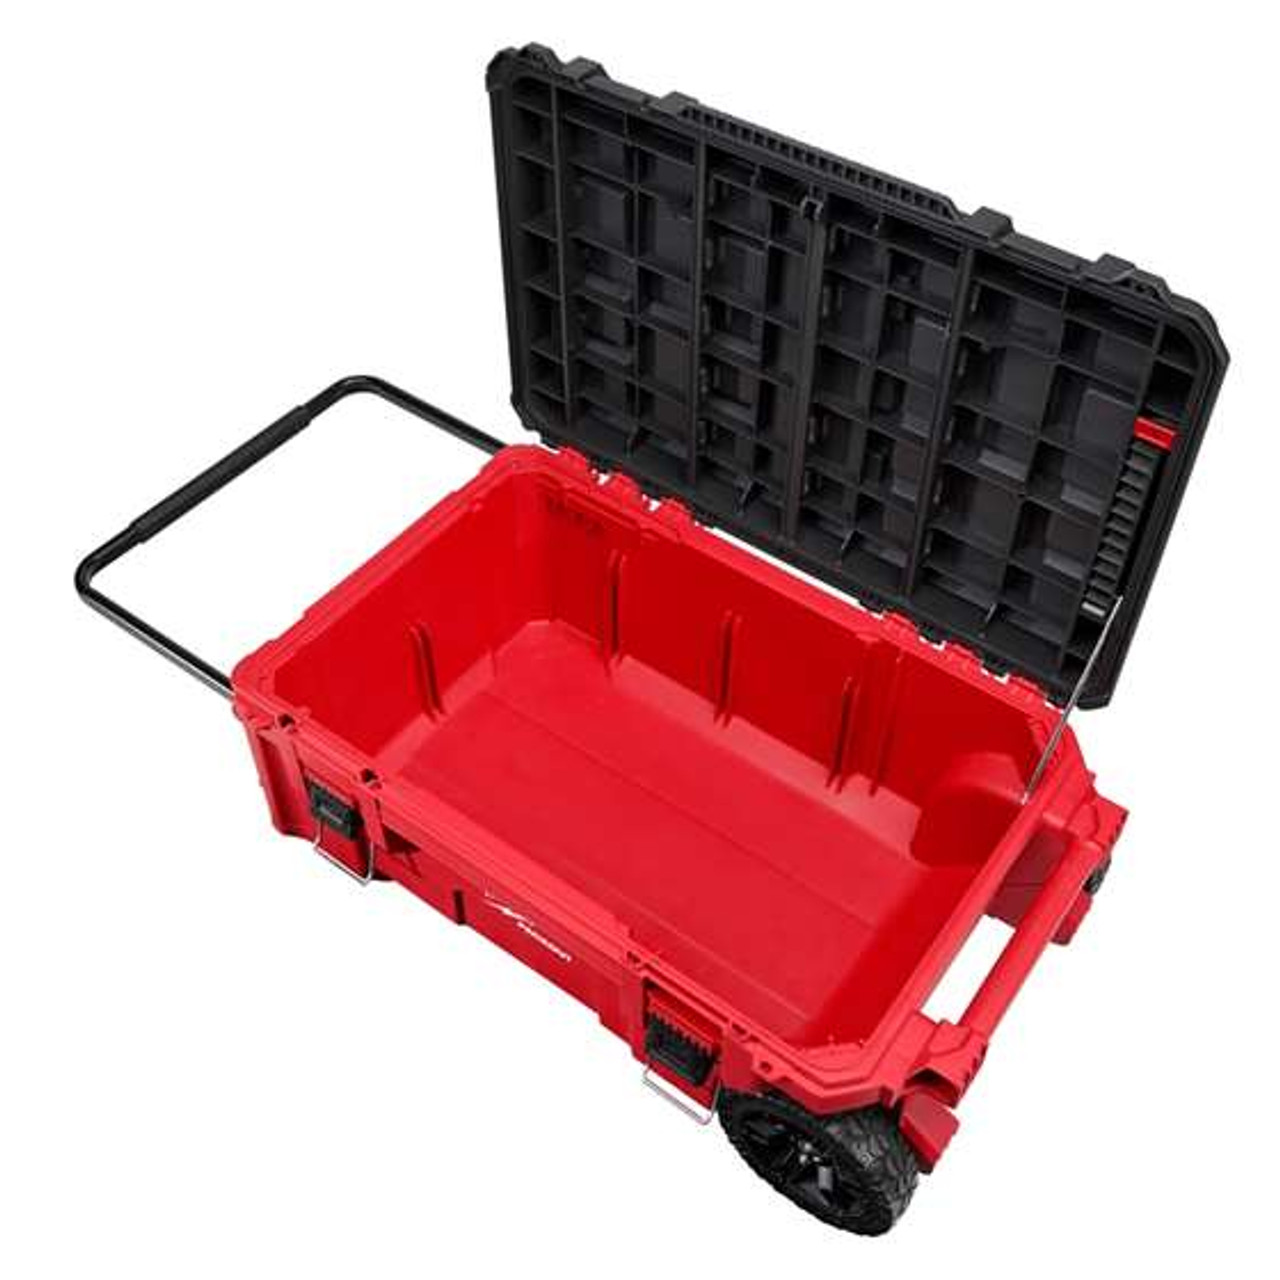 PACKOUT Rolling Tool Box, new